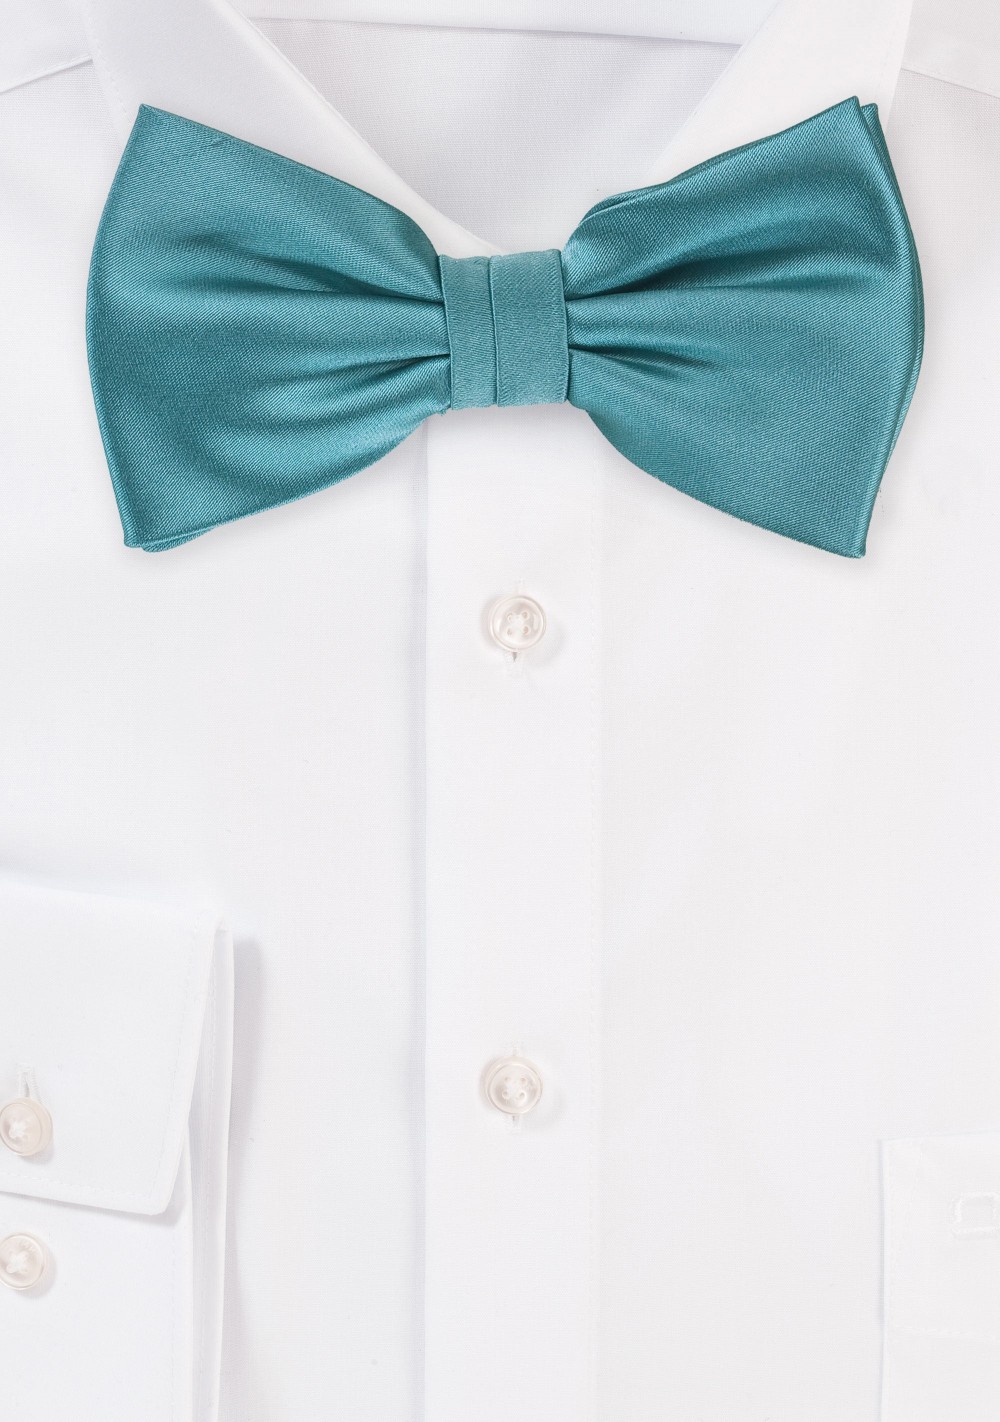 Light Teal Green Bow Tie